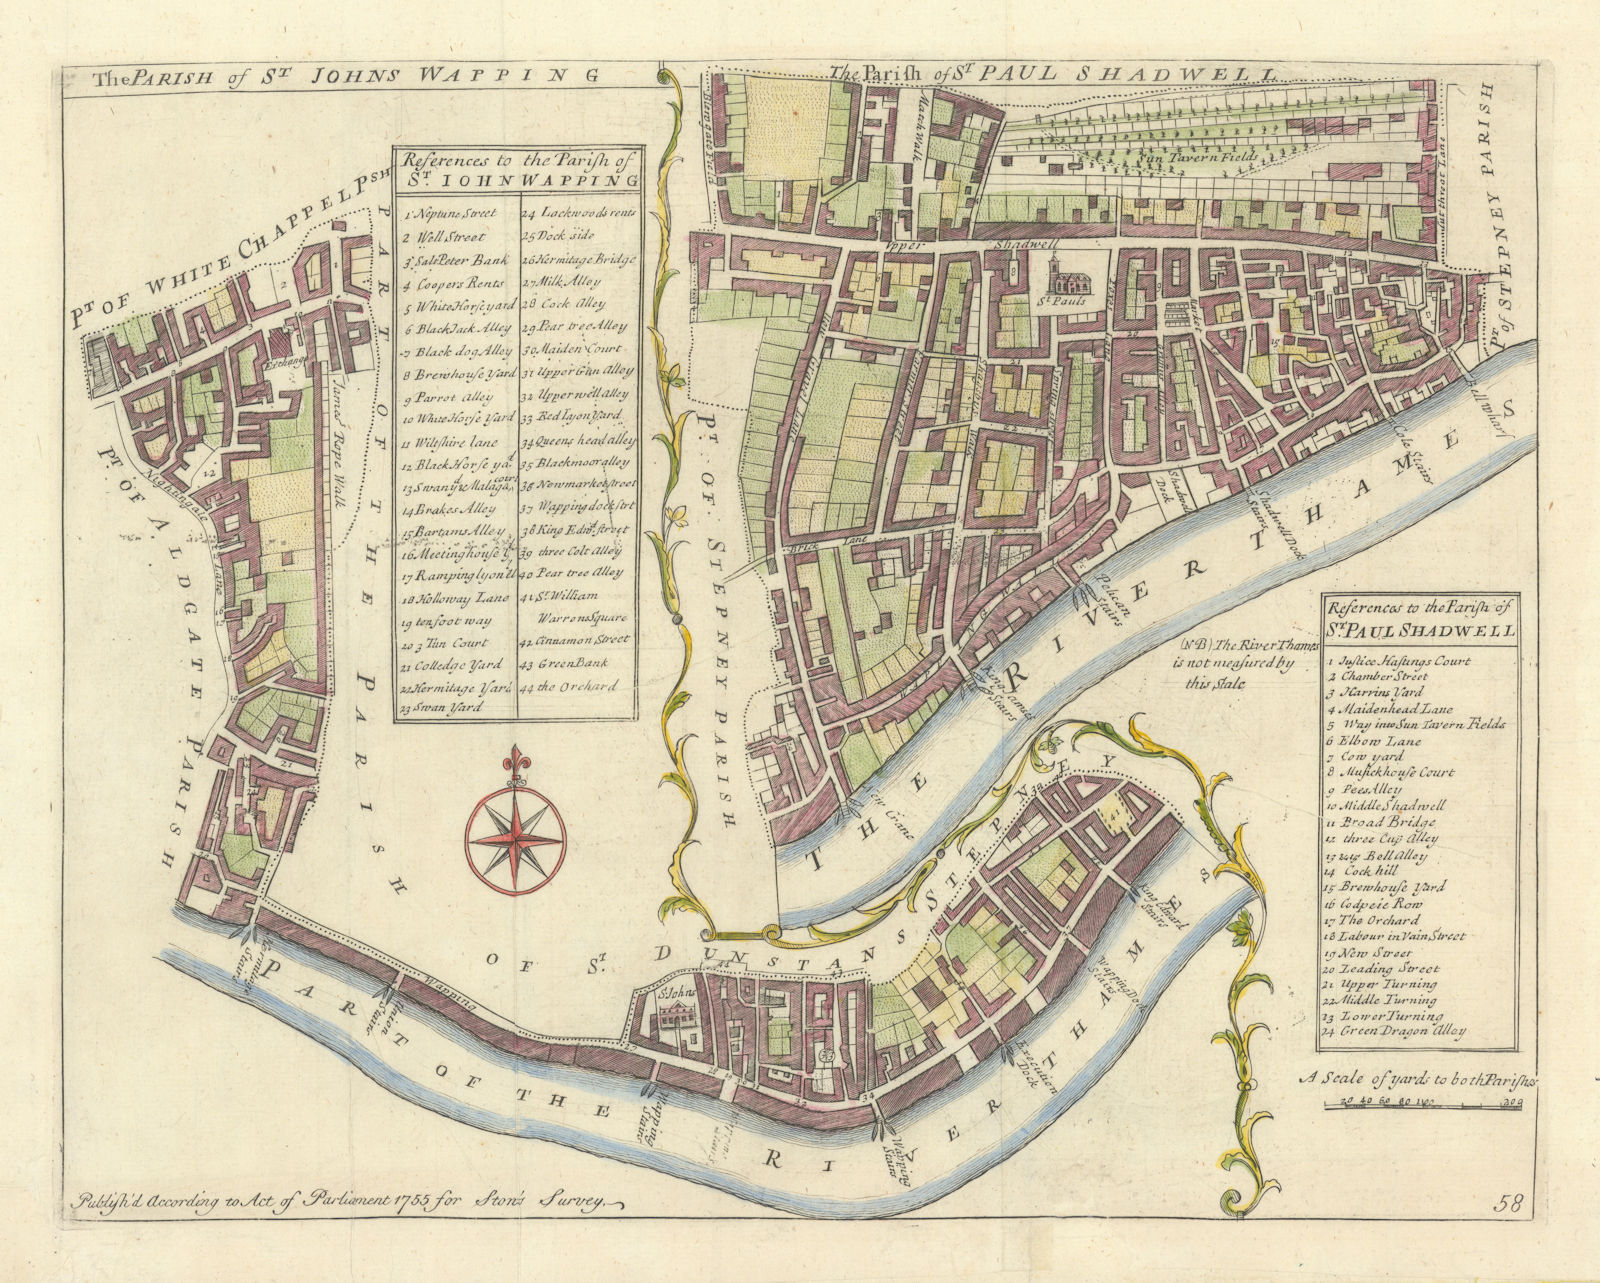 Associate Product The parishes of St John's, Wapping & St Paul, Shadwell. STOW/STRYPE 1755 map